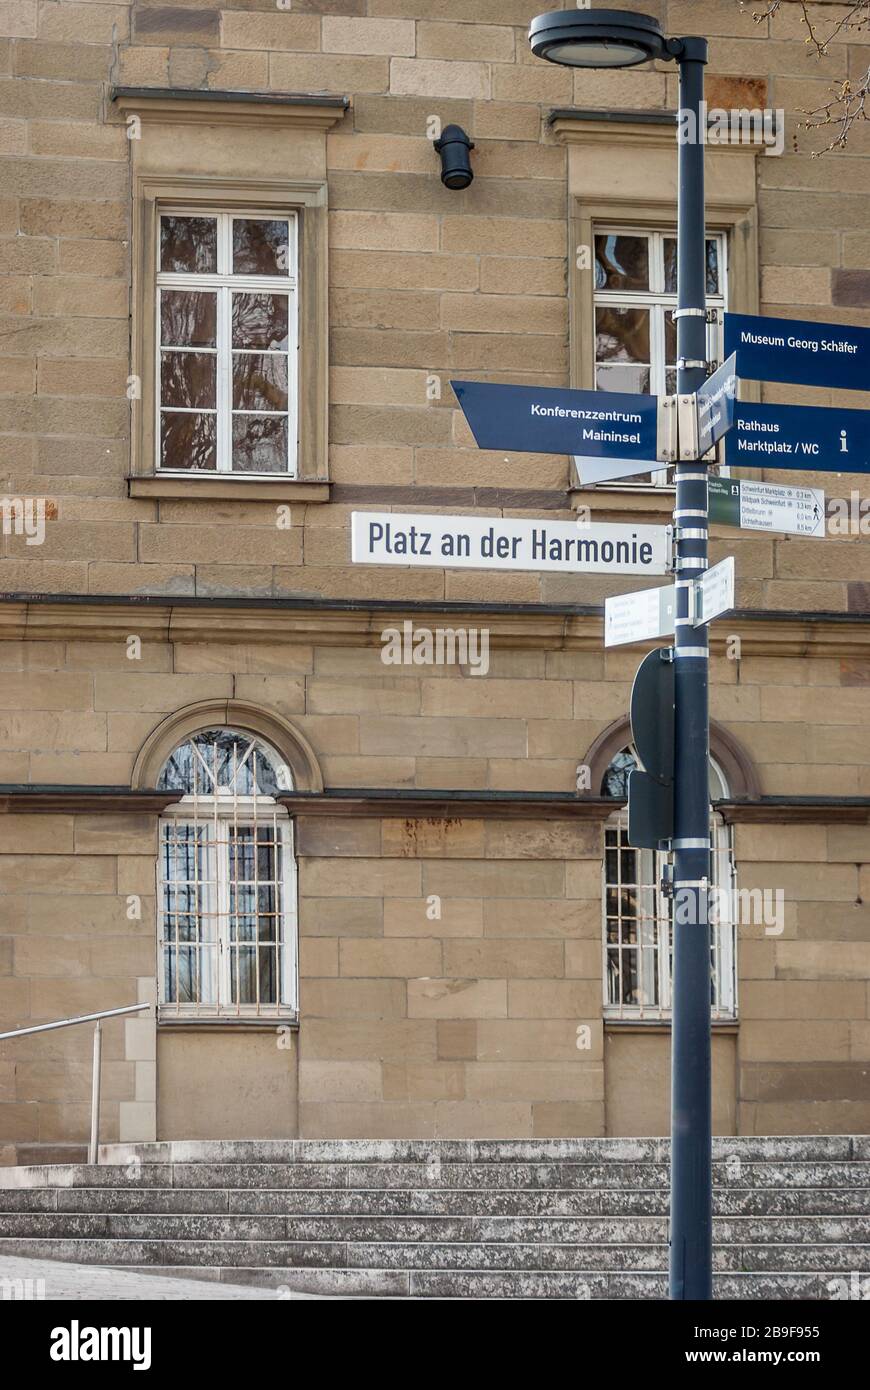 Signposting place at Harmonie, guidepost for tourism and visitors Stock Photo